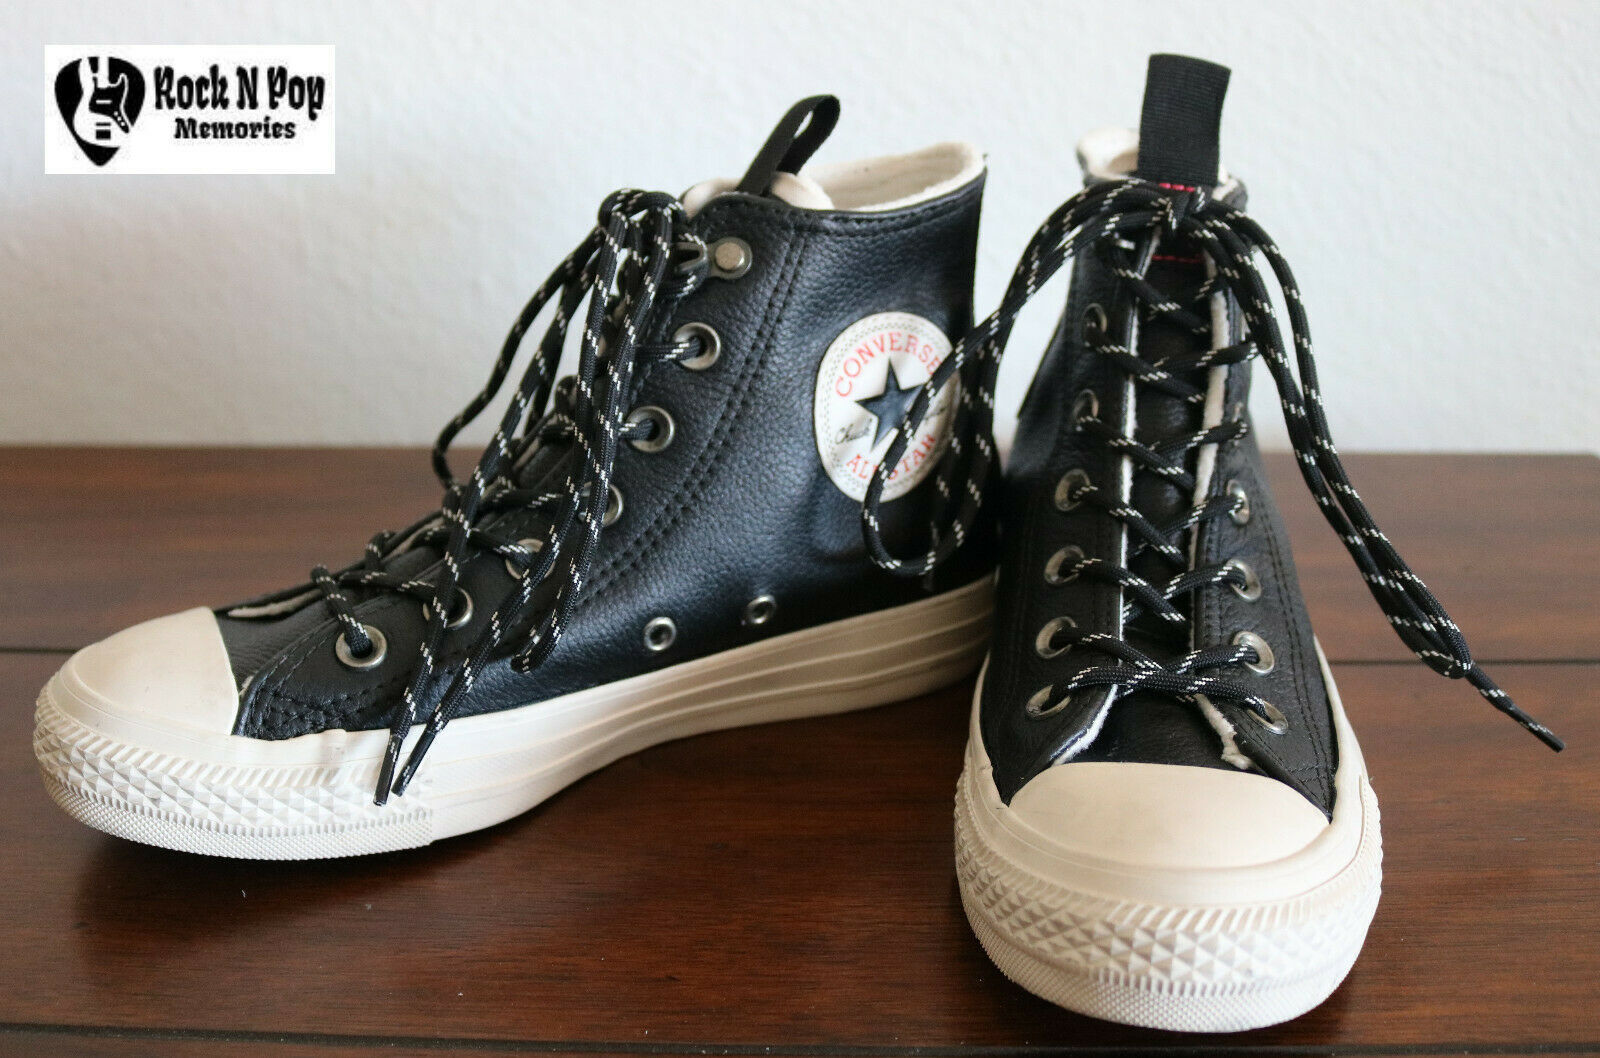 converse chuck taylor all star desert storm leather low top